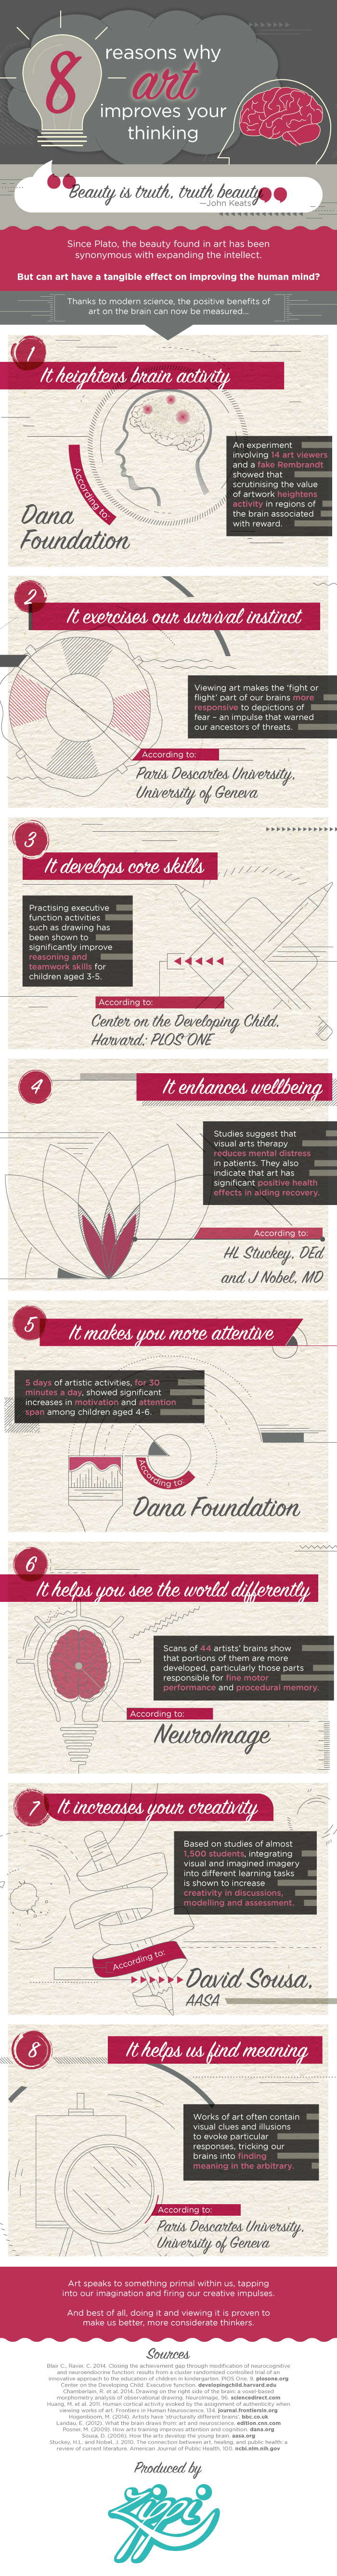 8 Reasons Why Art Improves Your Thinking, an infographic from The Studio